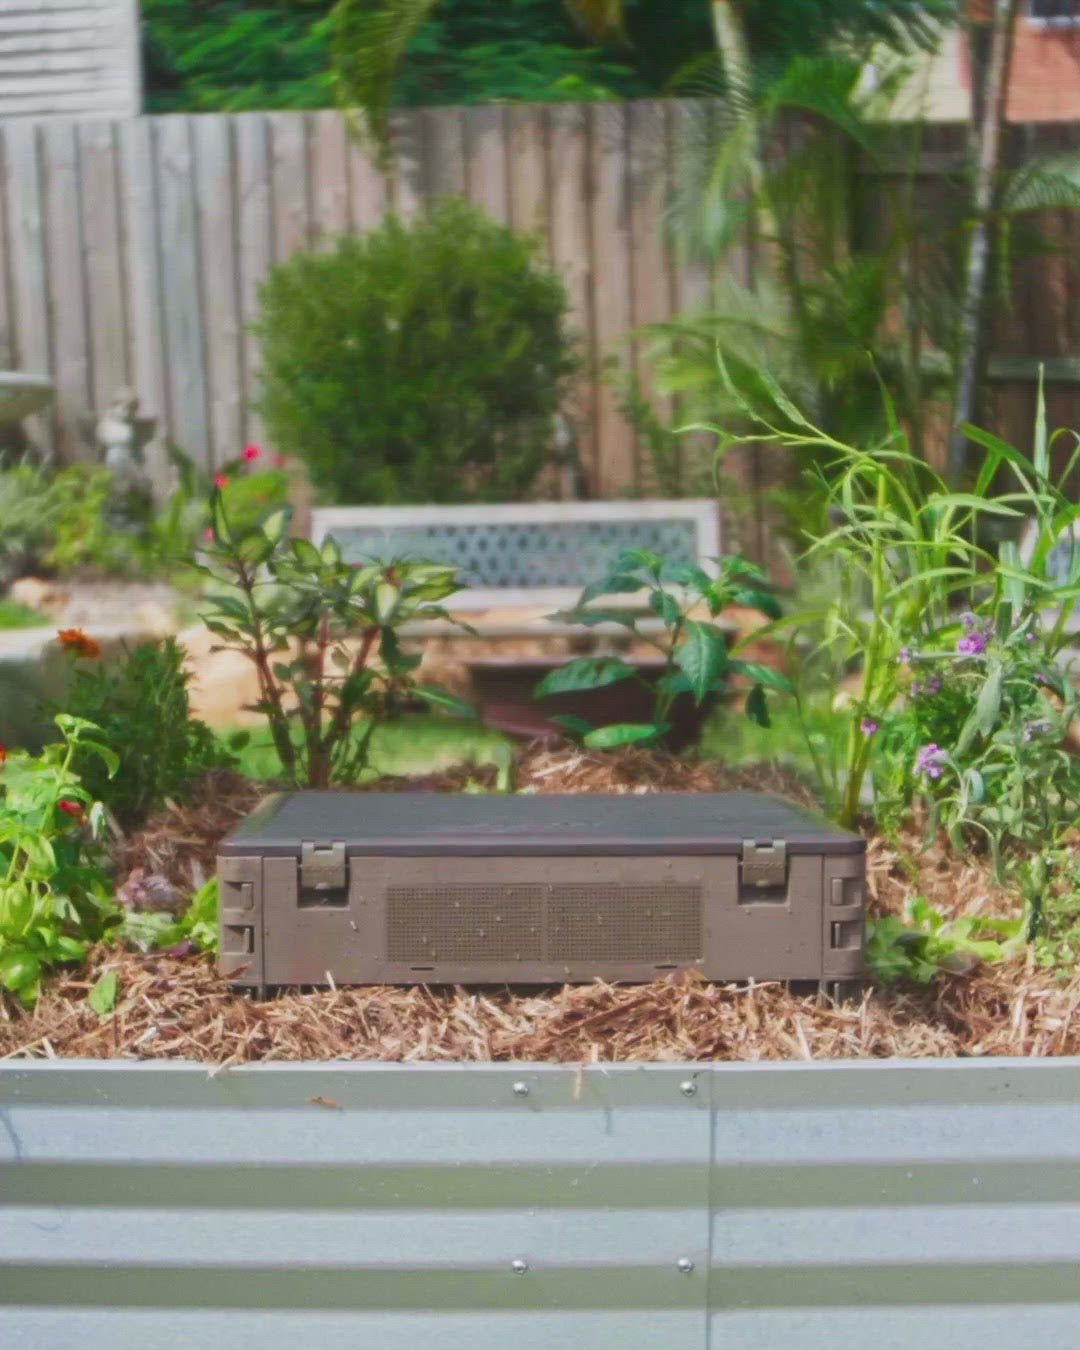 video showing the subpod mini compost bin and worm farm being assembled and used to compost food waste at home